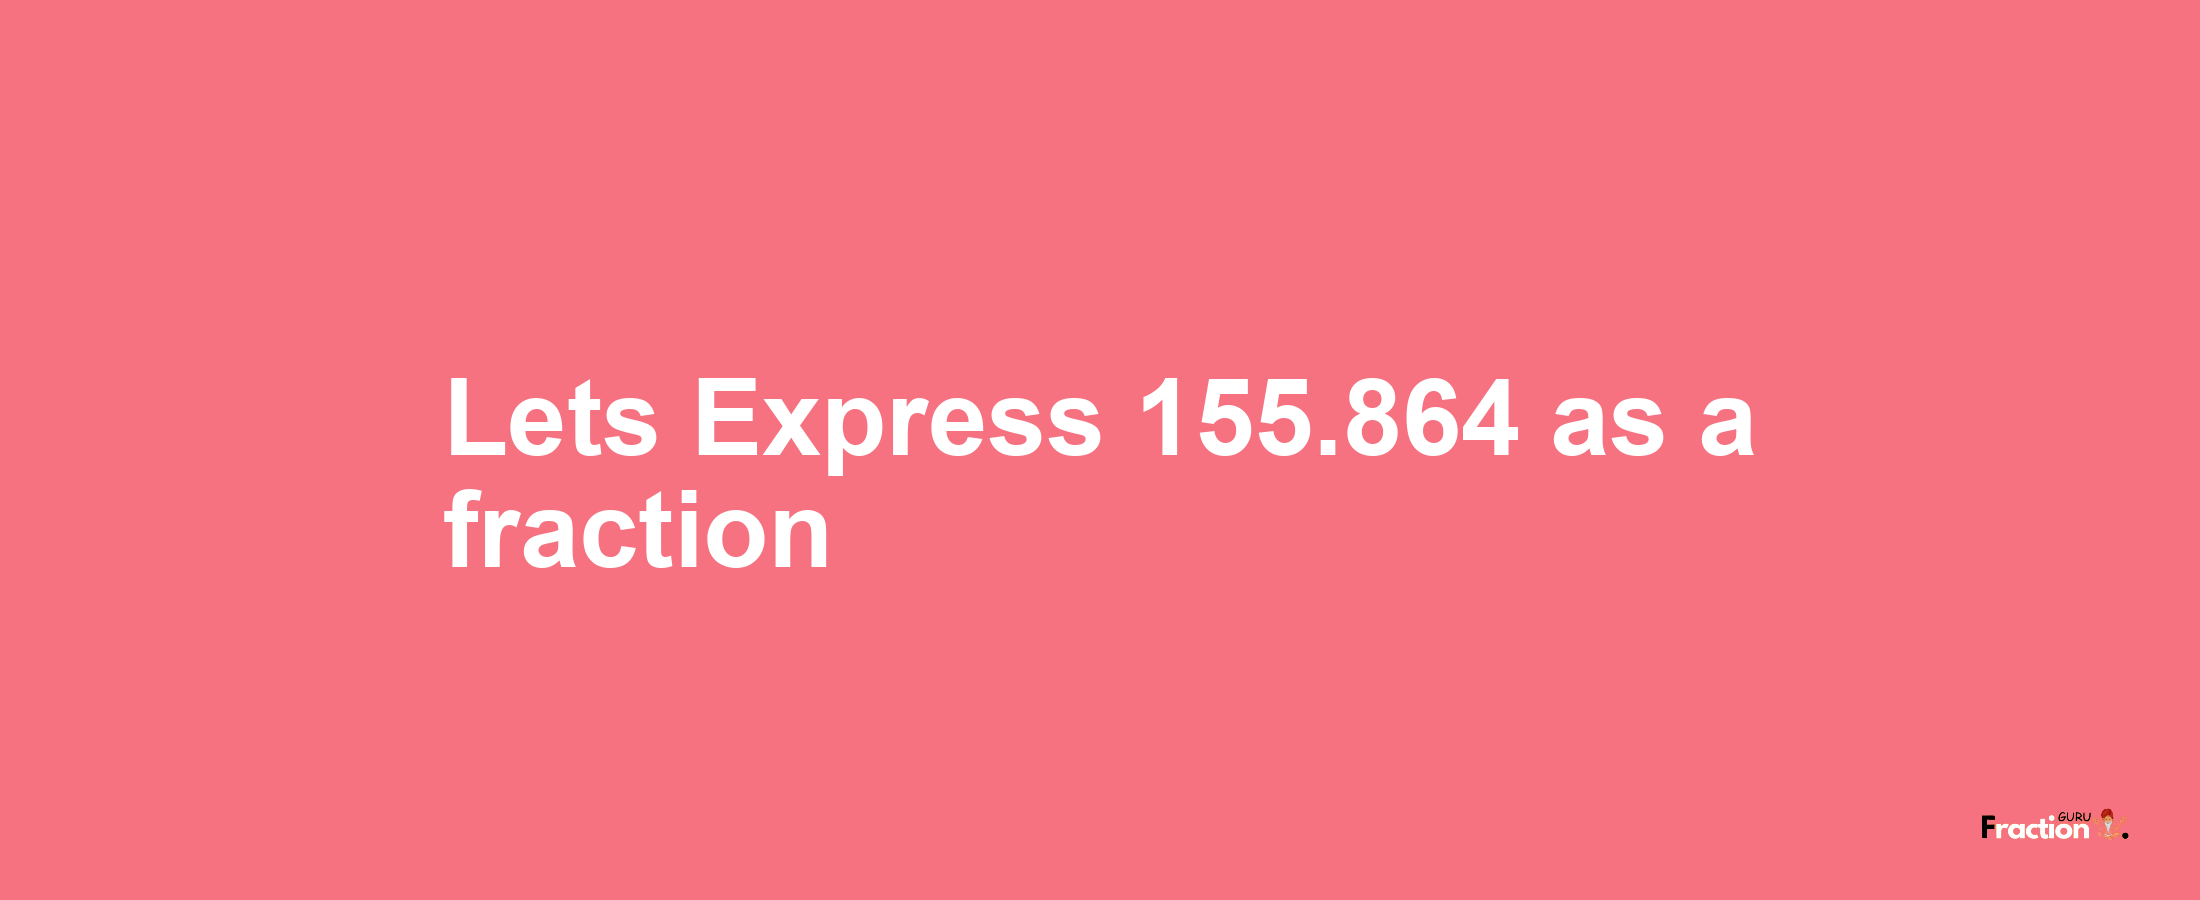 Lets Express 155.864 as afraction